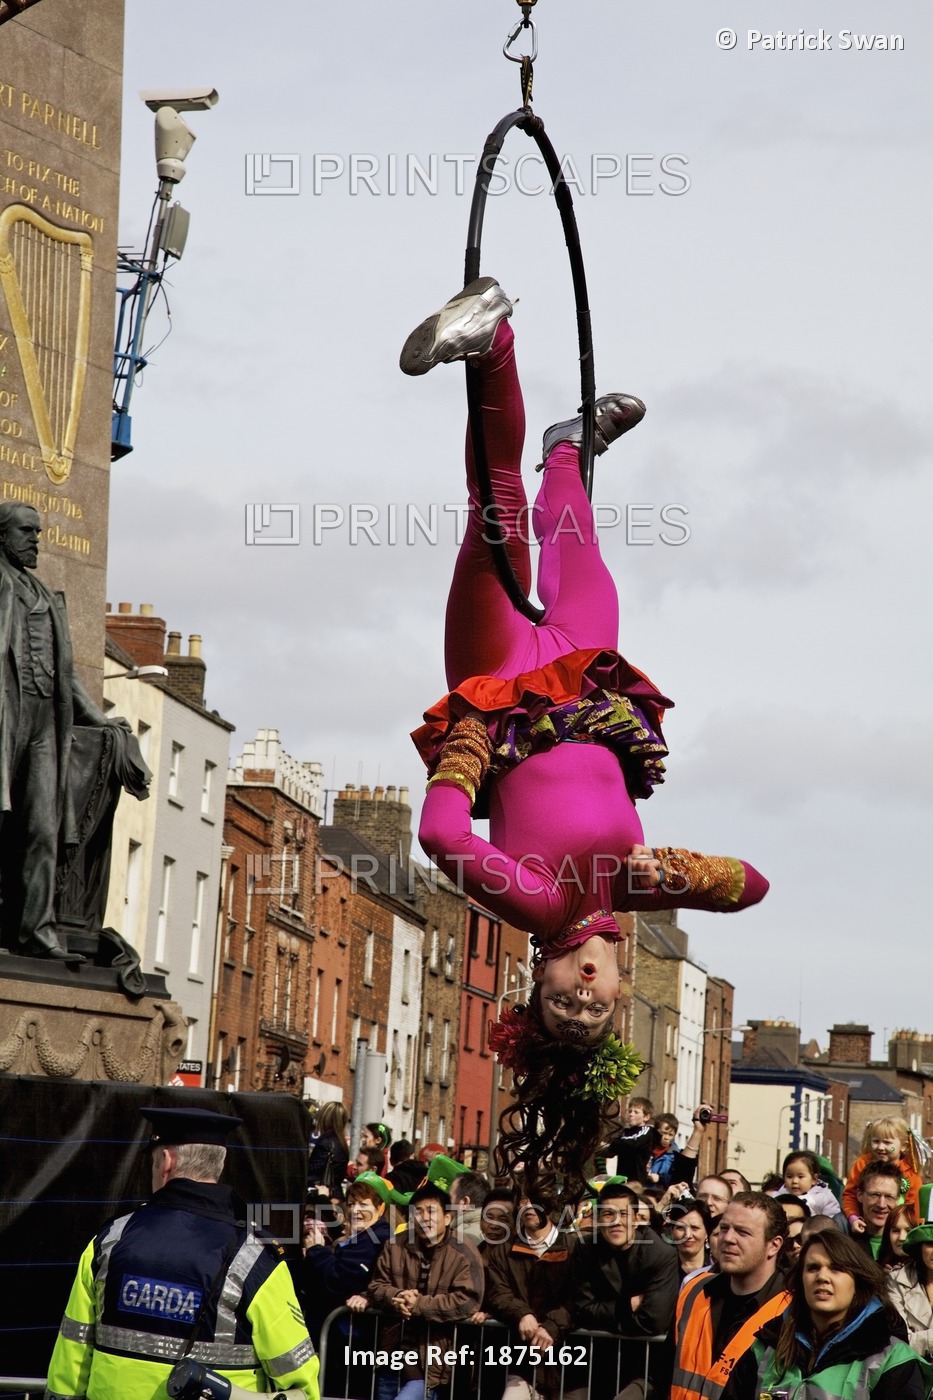 Dublin, Ireland; An Acrobat Doing A Performance In A Parade On O'connell Street